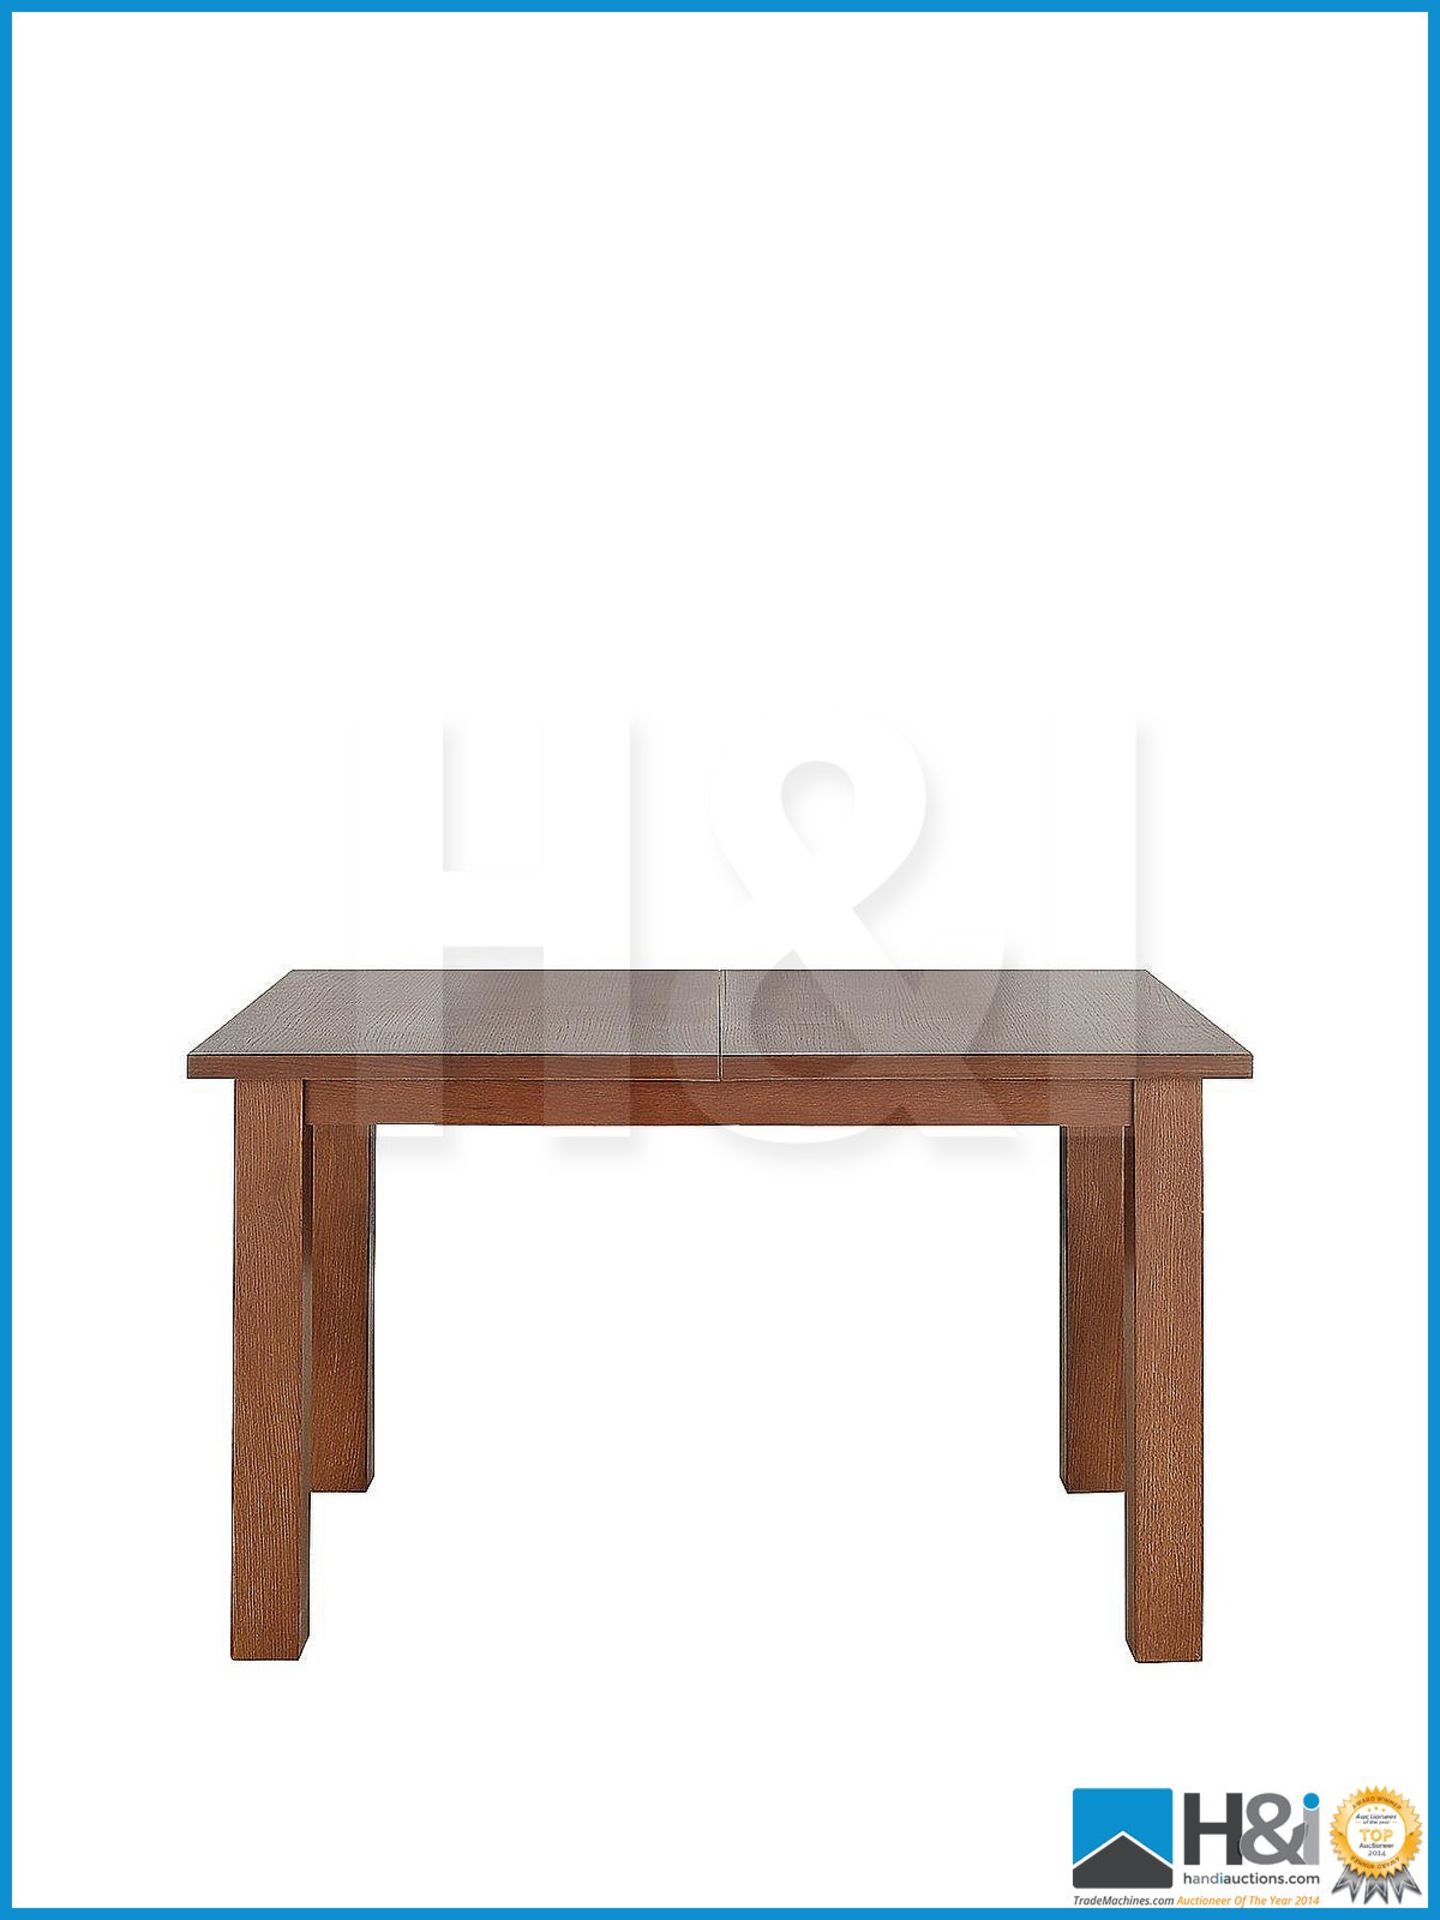 NEW IN BOX PRIMO EXTENDING DINING TABLE [WALNUT] 75 x 75 x 120cm RRP GBP 263